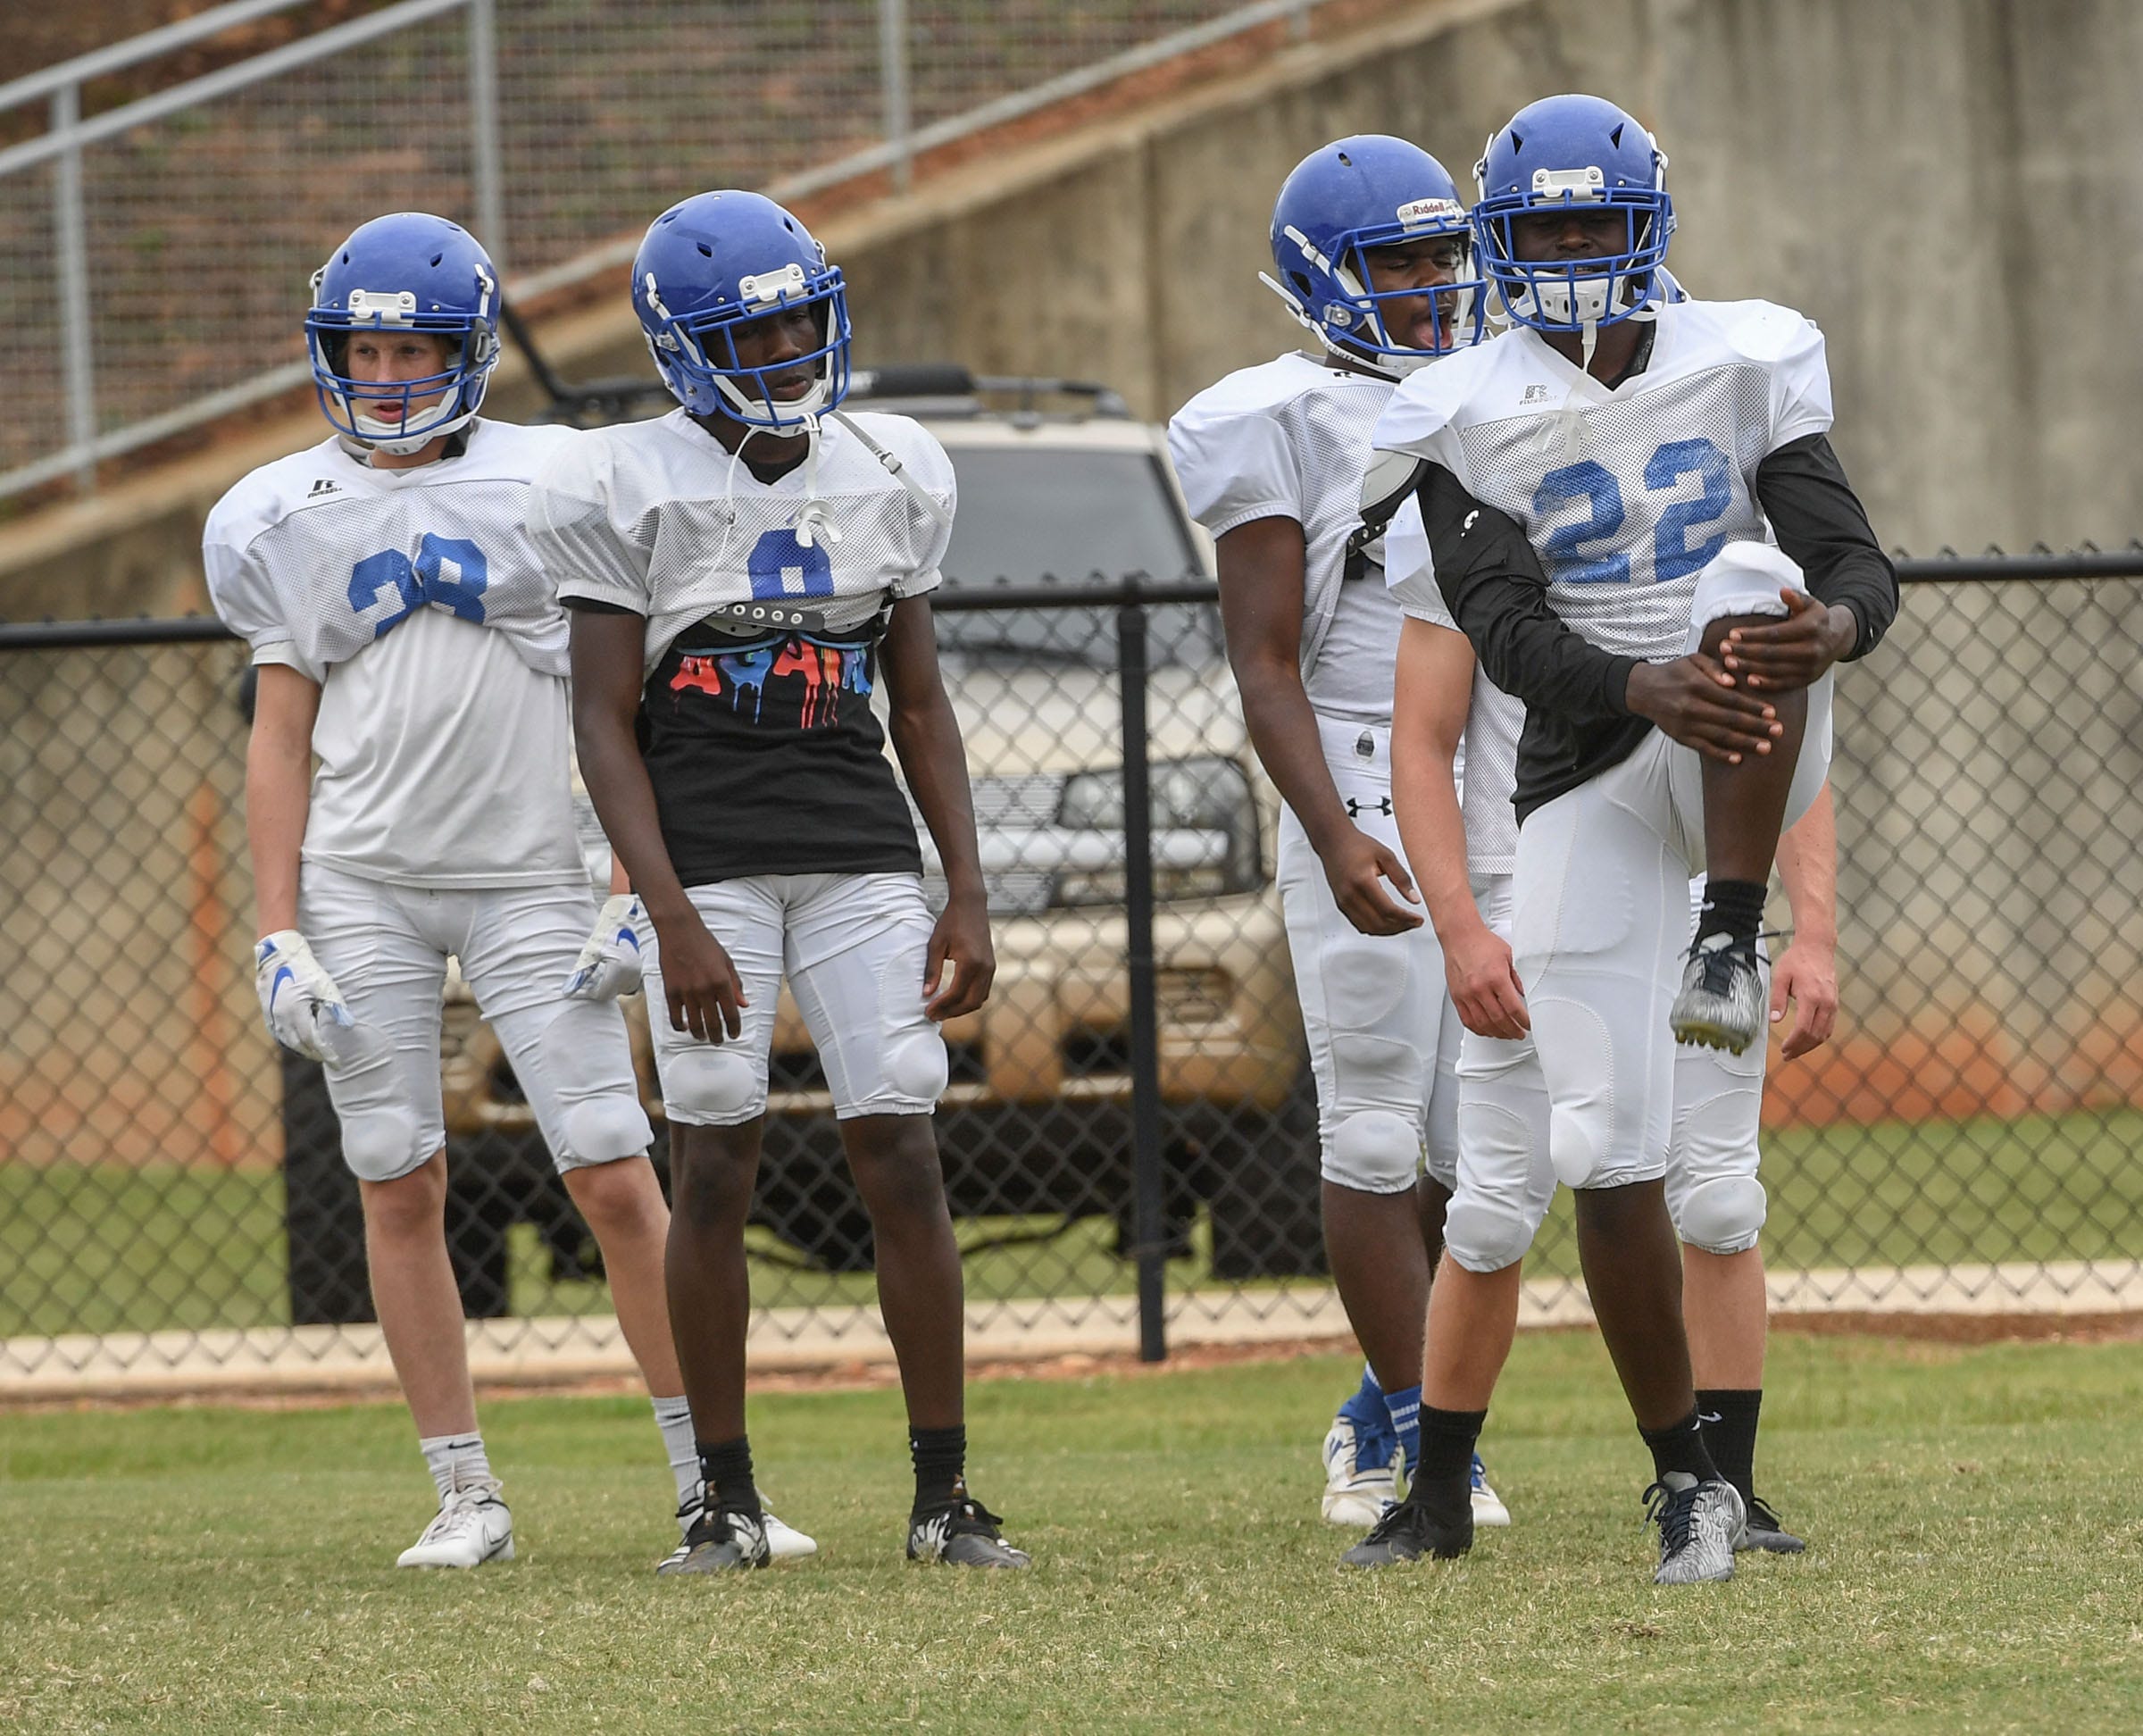 Woodmont High School football running back Joshua Kamoto, right, stretches at the beginning of practice in Piedmont, S.C. September 2020.